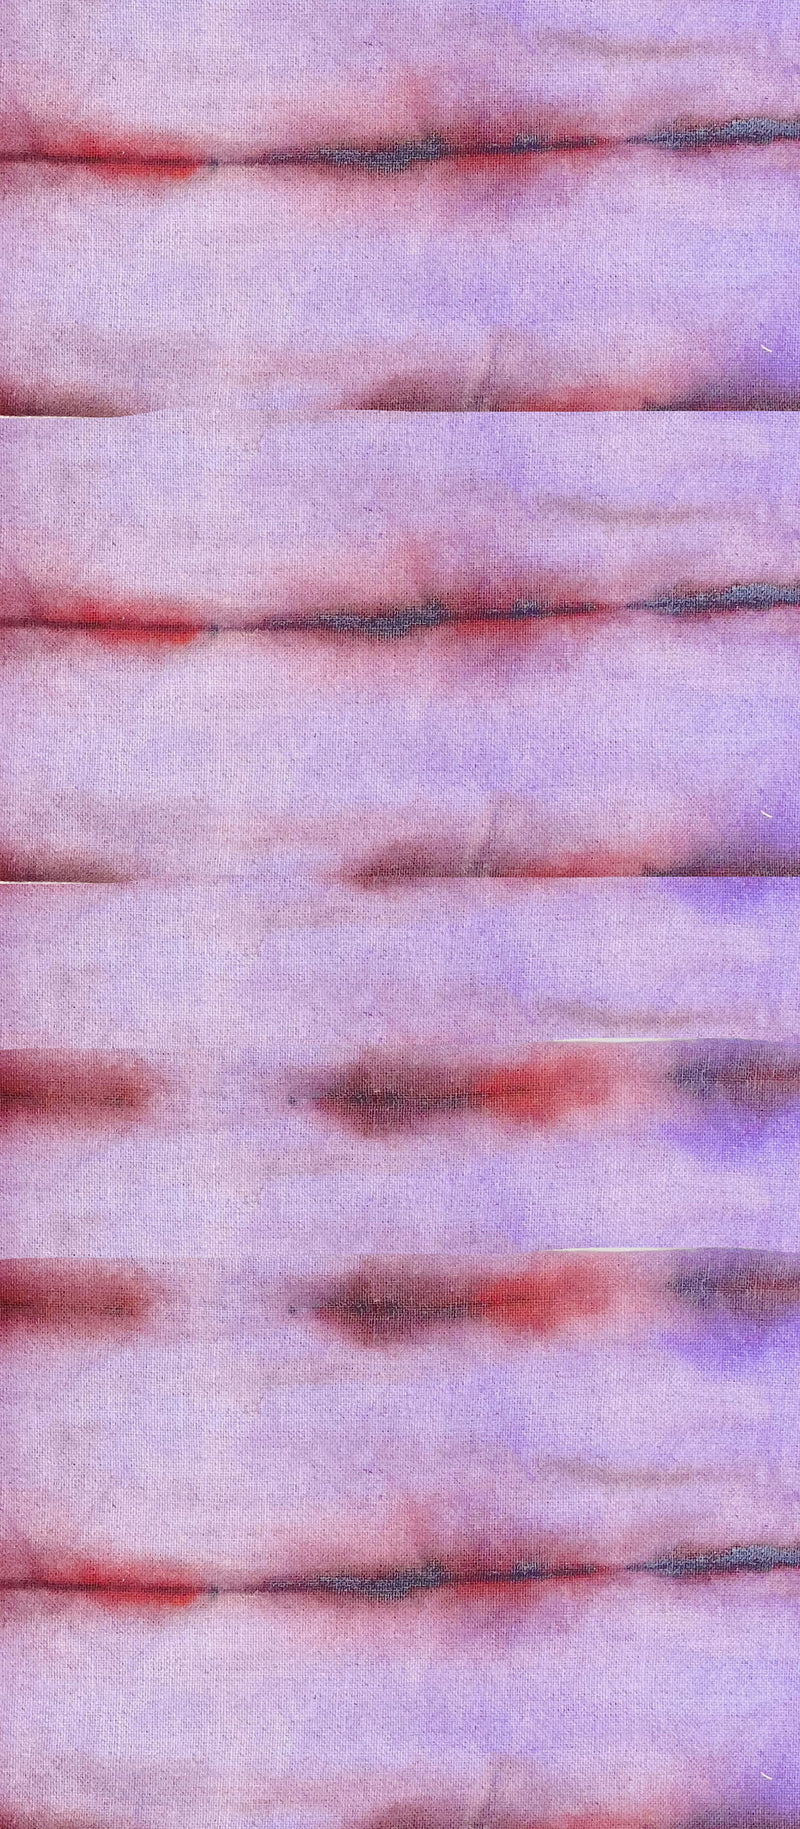 High Brow Hippie - Linen Shibori Table Runners in 9 color-ways/2 sizes